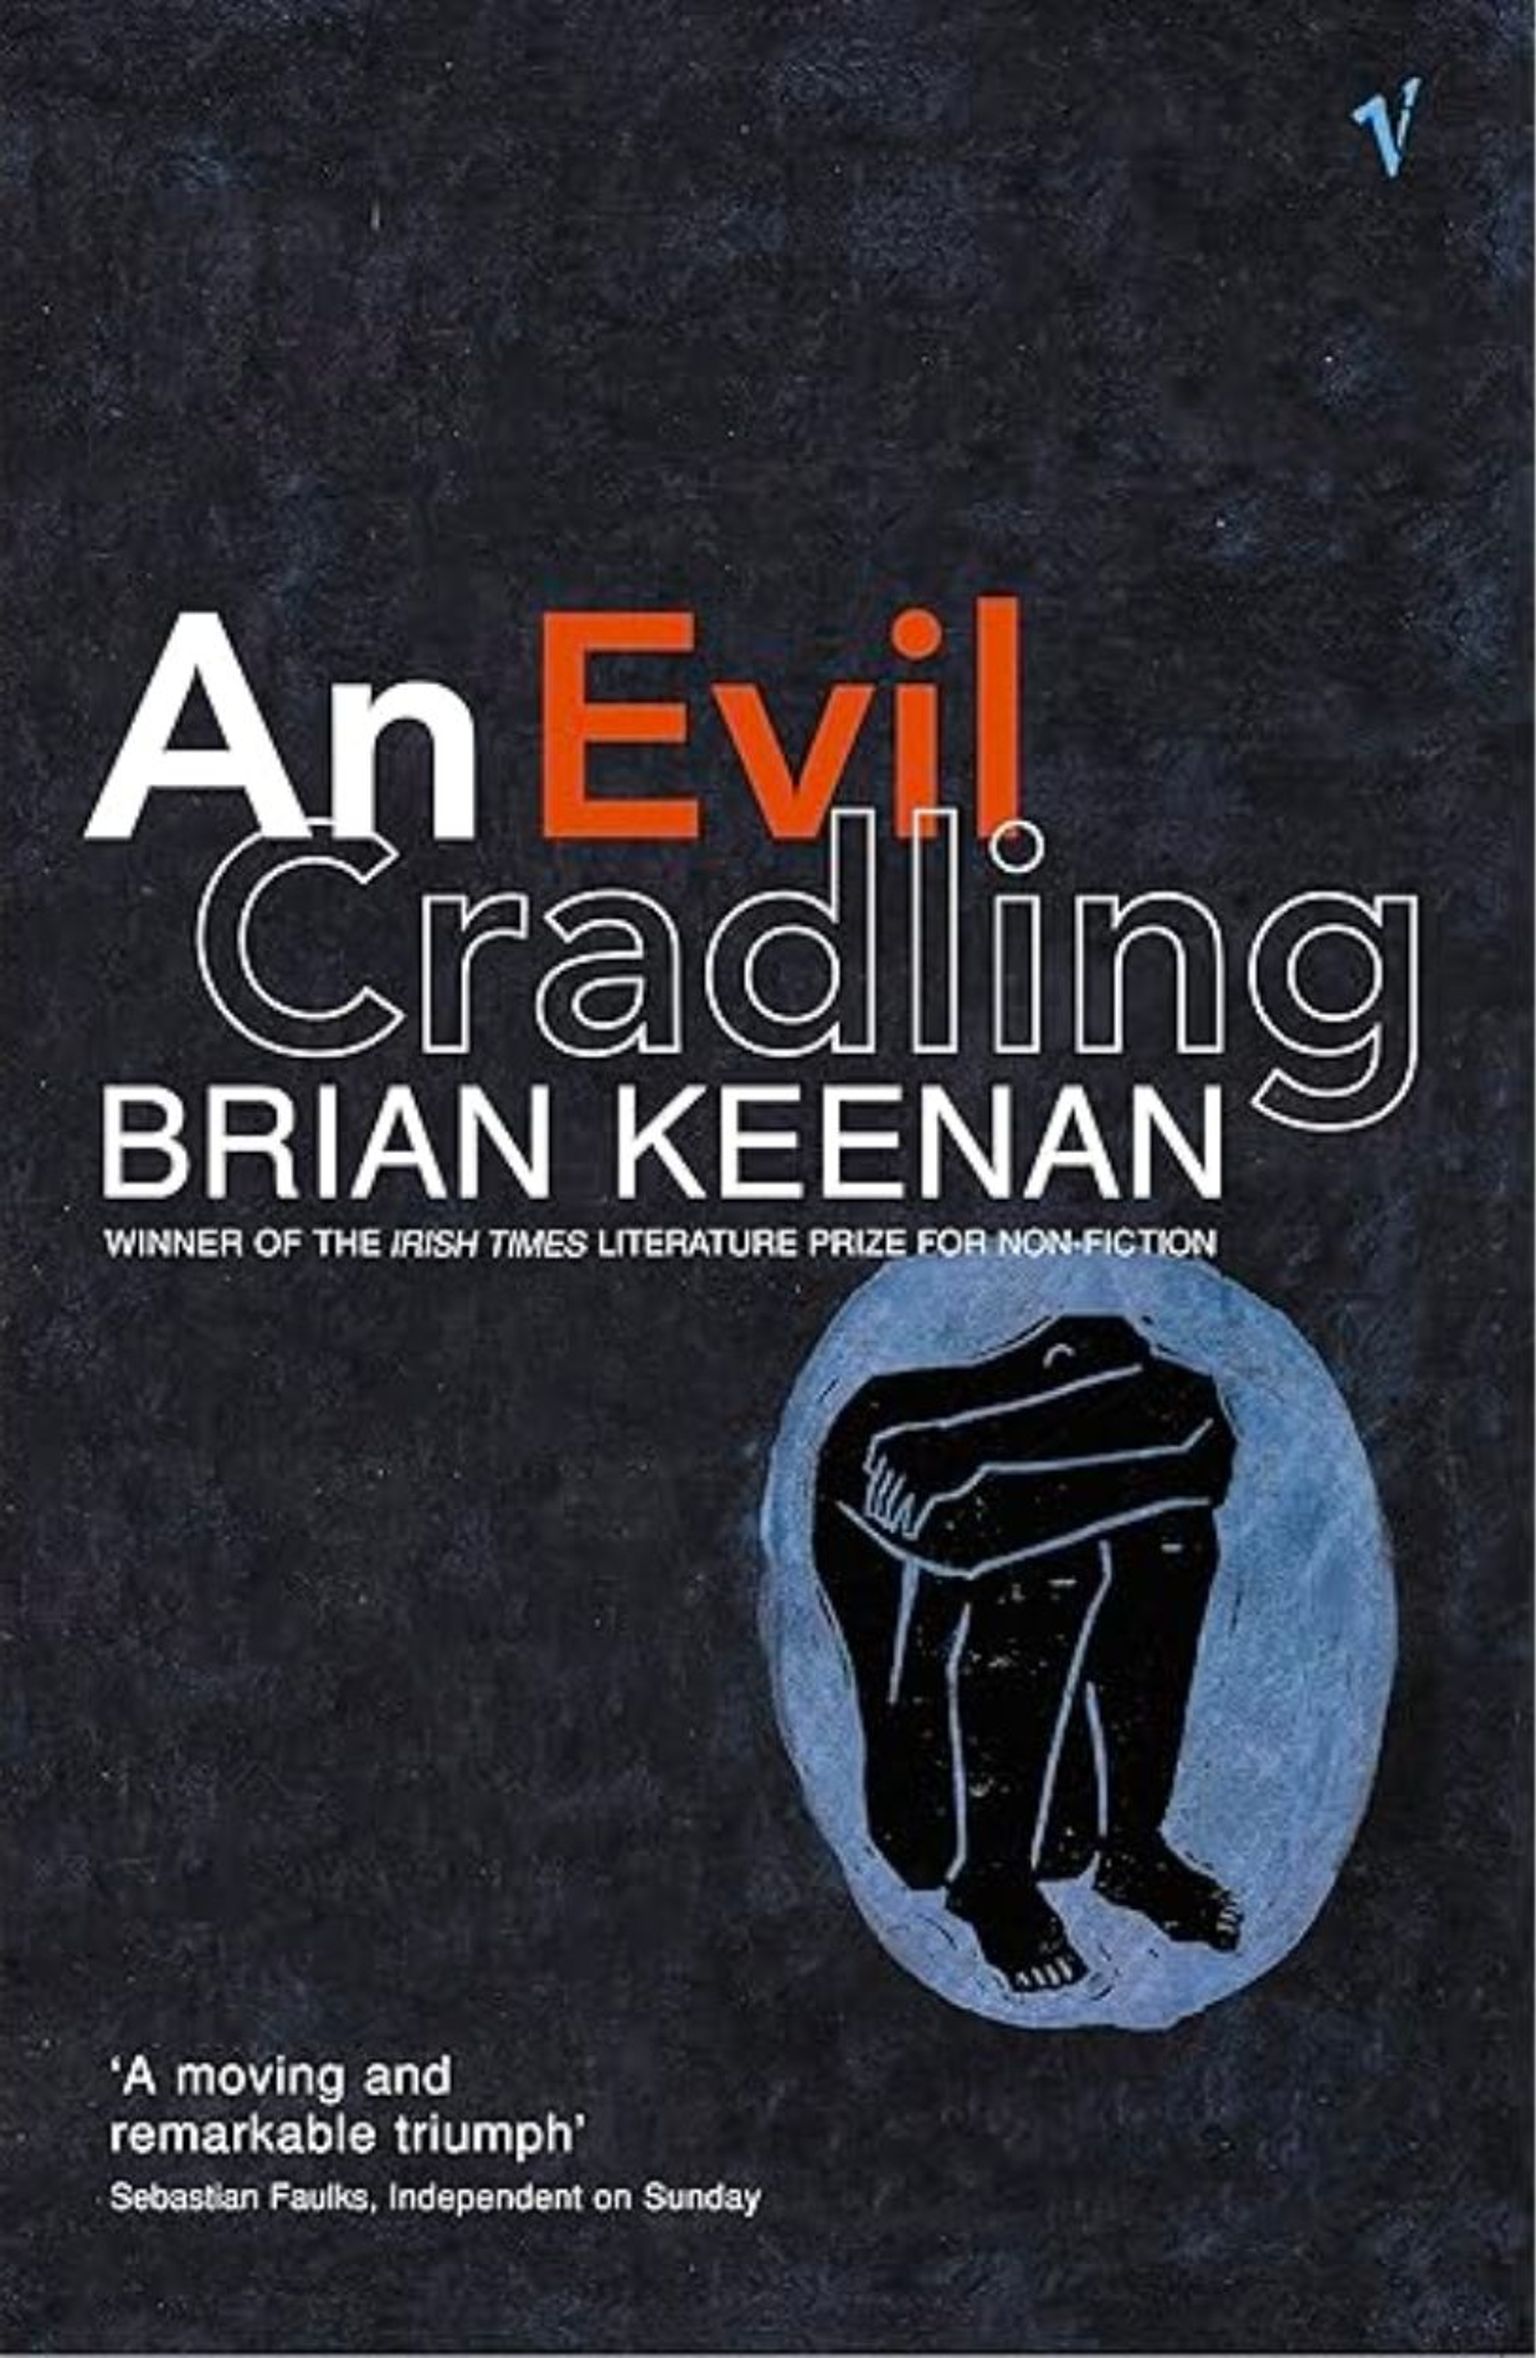 Book Recommendations - An Evil Cradling